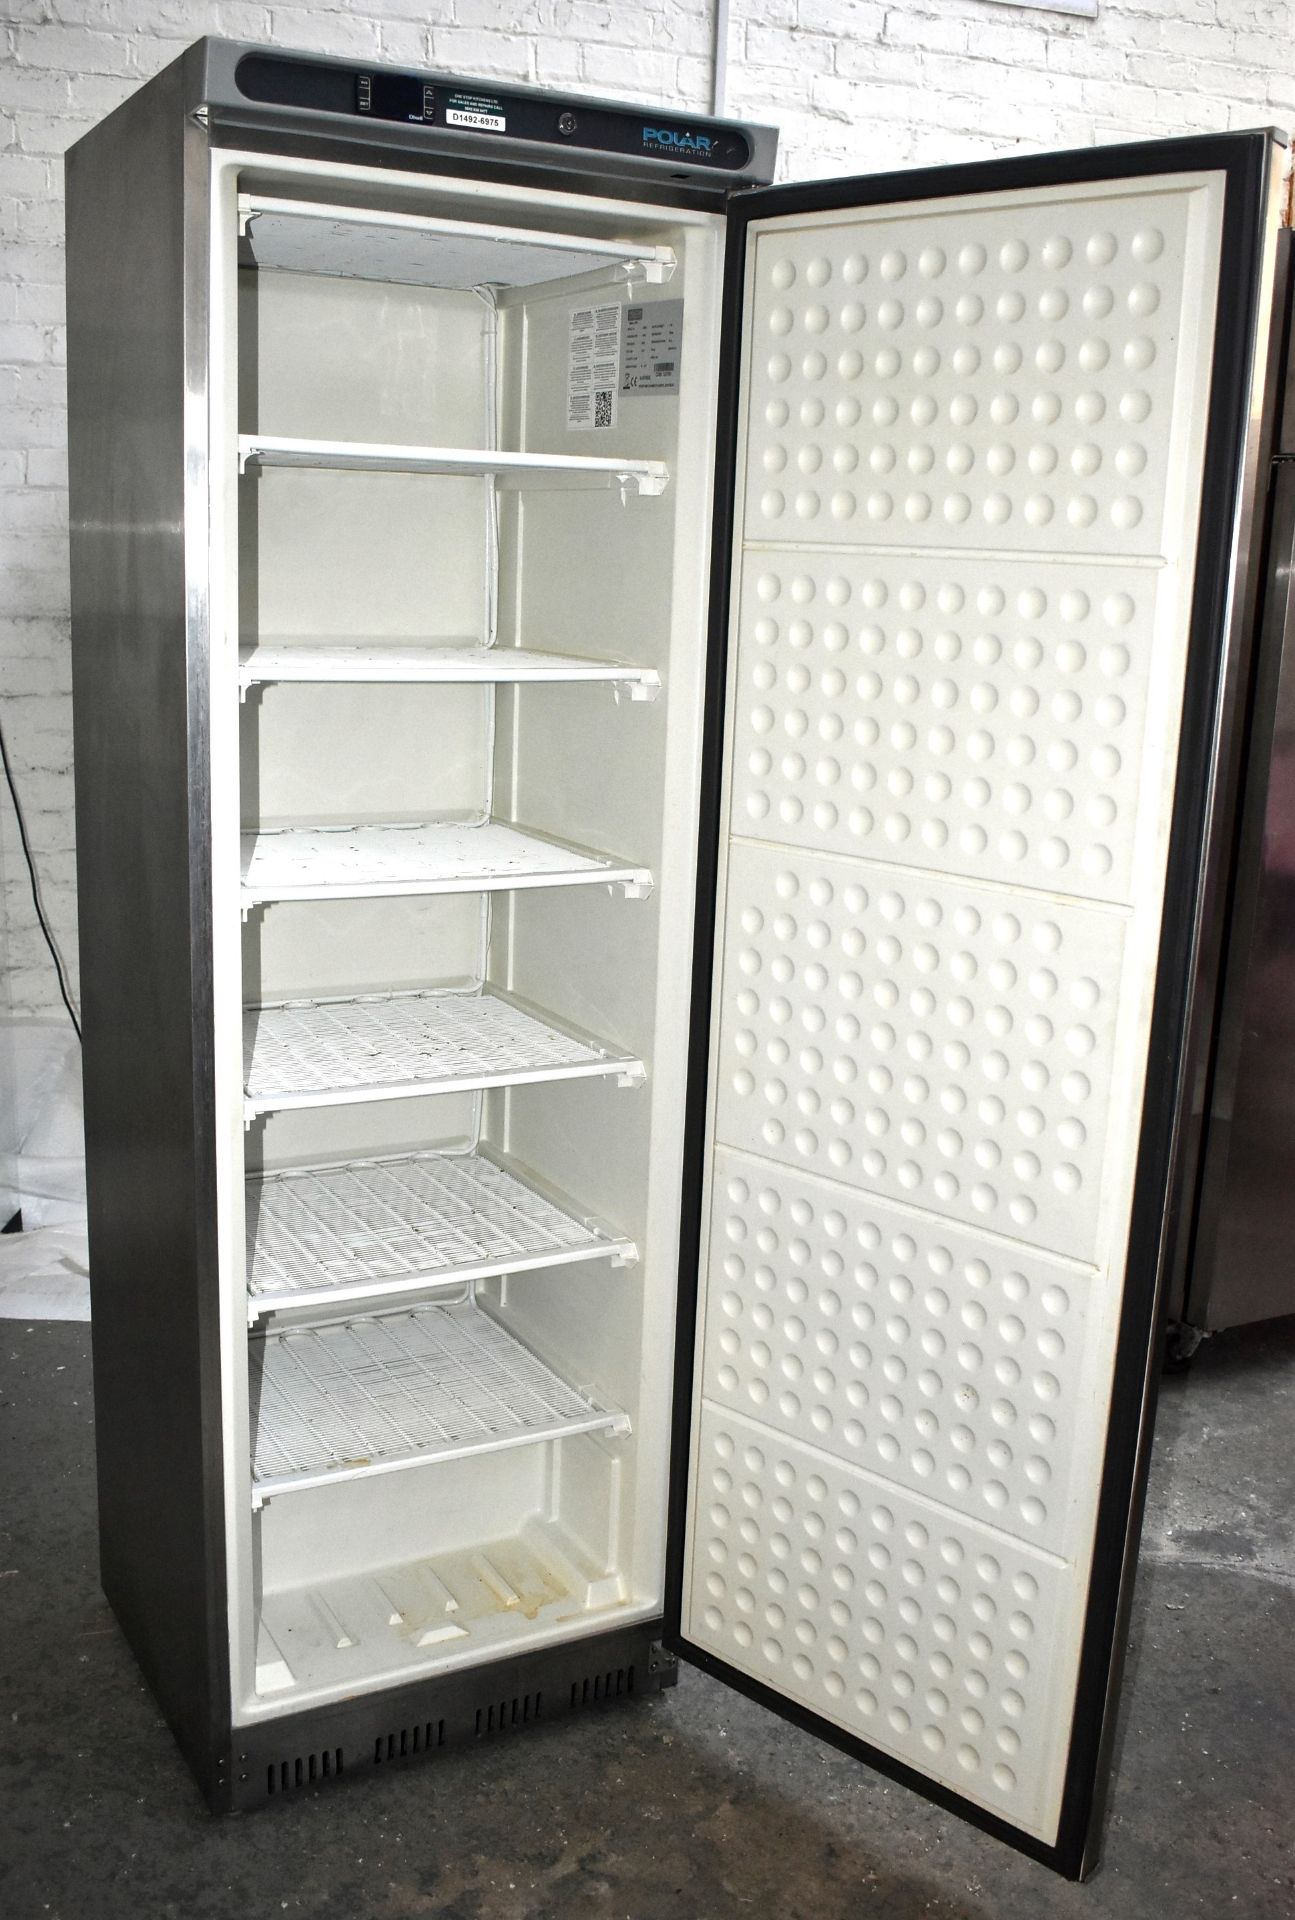 1 x Polar C-Series Commercial Upright Freezer With Stainless Steel Finish - 365Ltr Capacity - Image 6 of 7